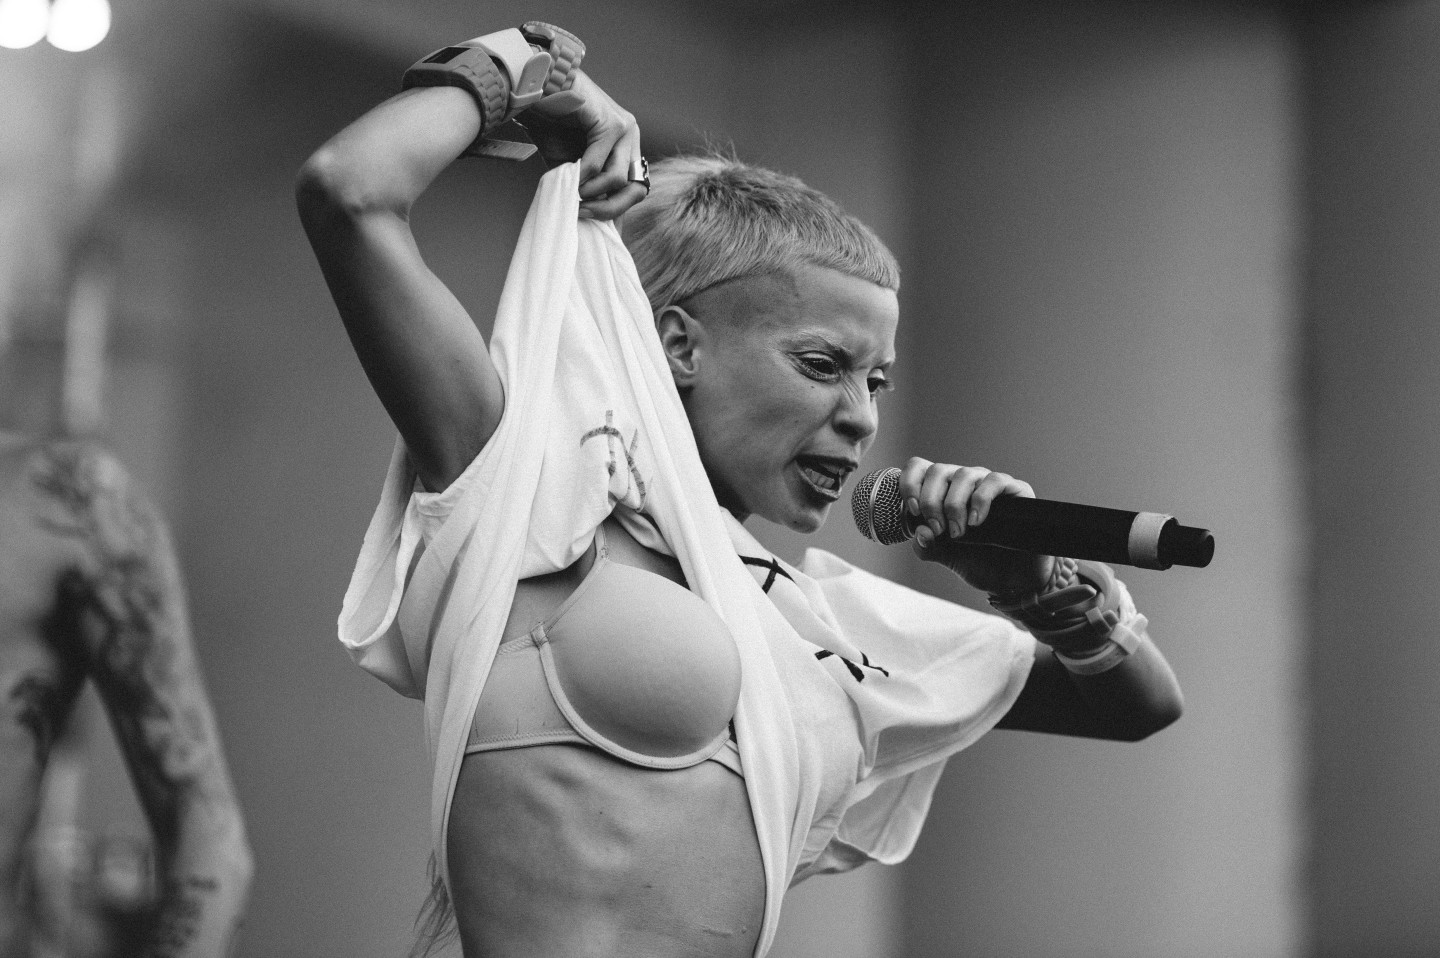 Die Antwoord at Lollapalooza 2012 - Lost In Concert